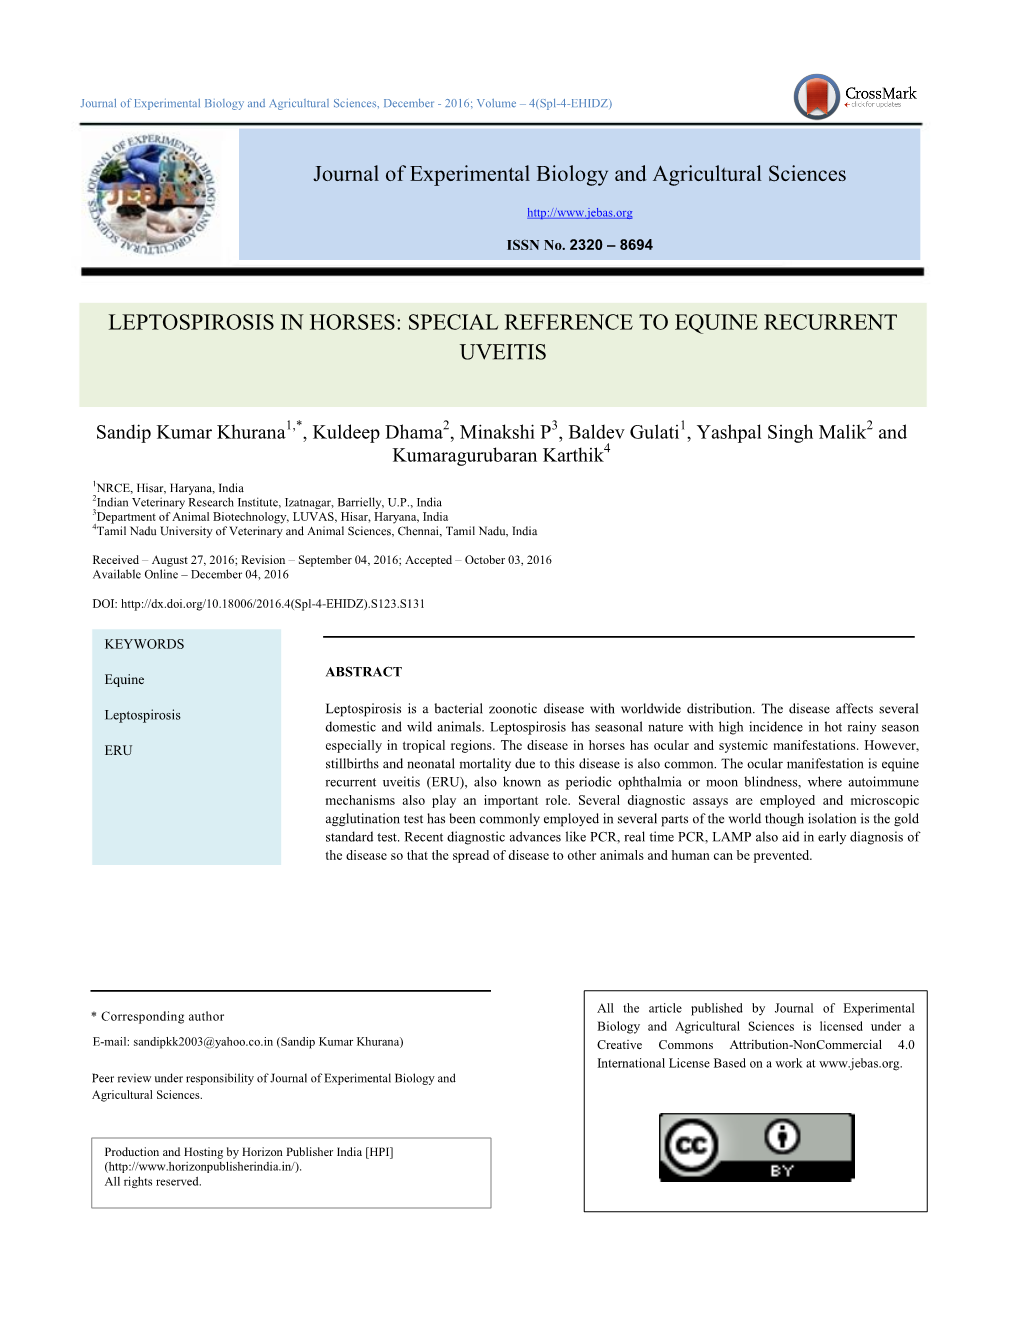 Leptospirosis in Horses: Special Reference to Equine Recurrent Uveitis